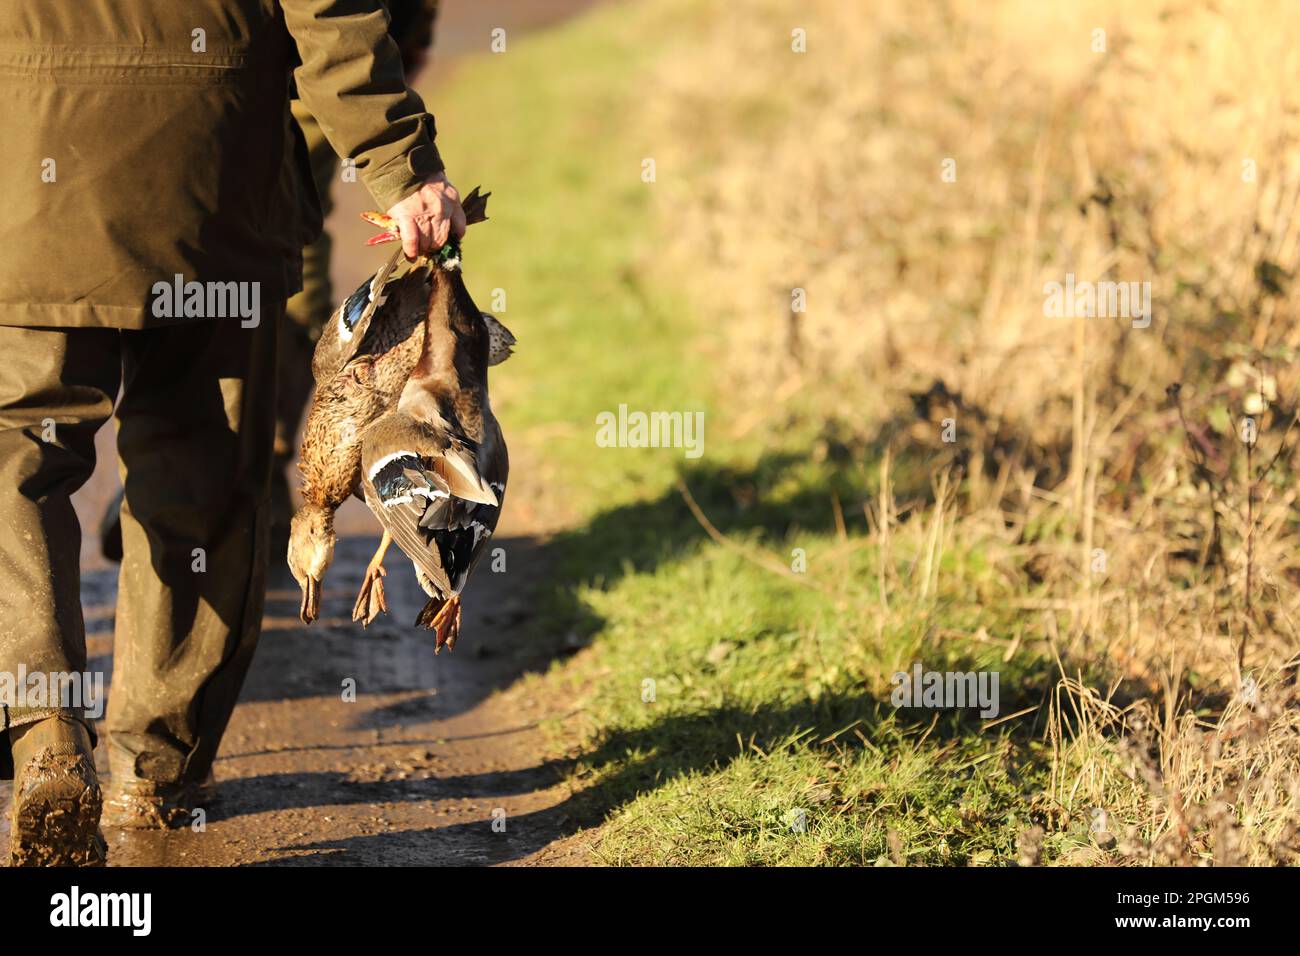 A man carrying dead ducks on a shoot in the countryside Stock Photo